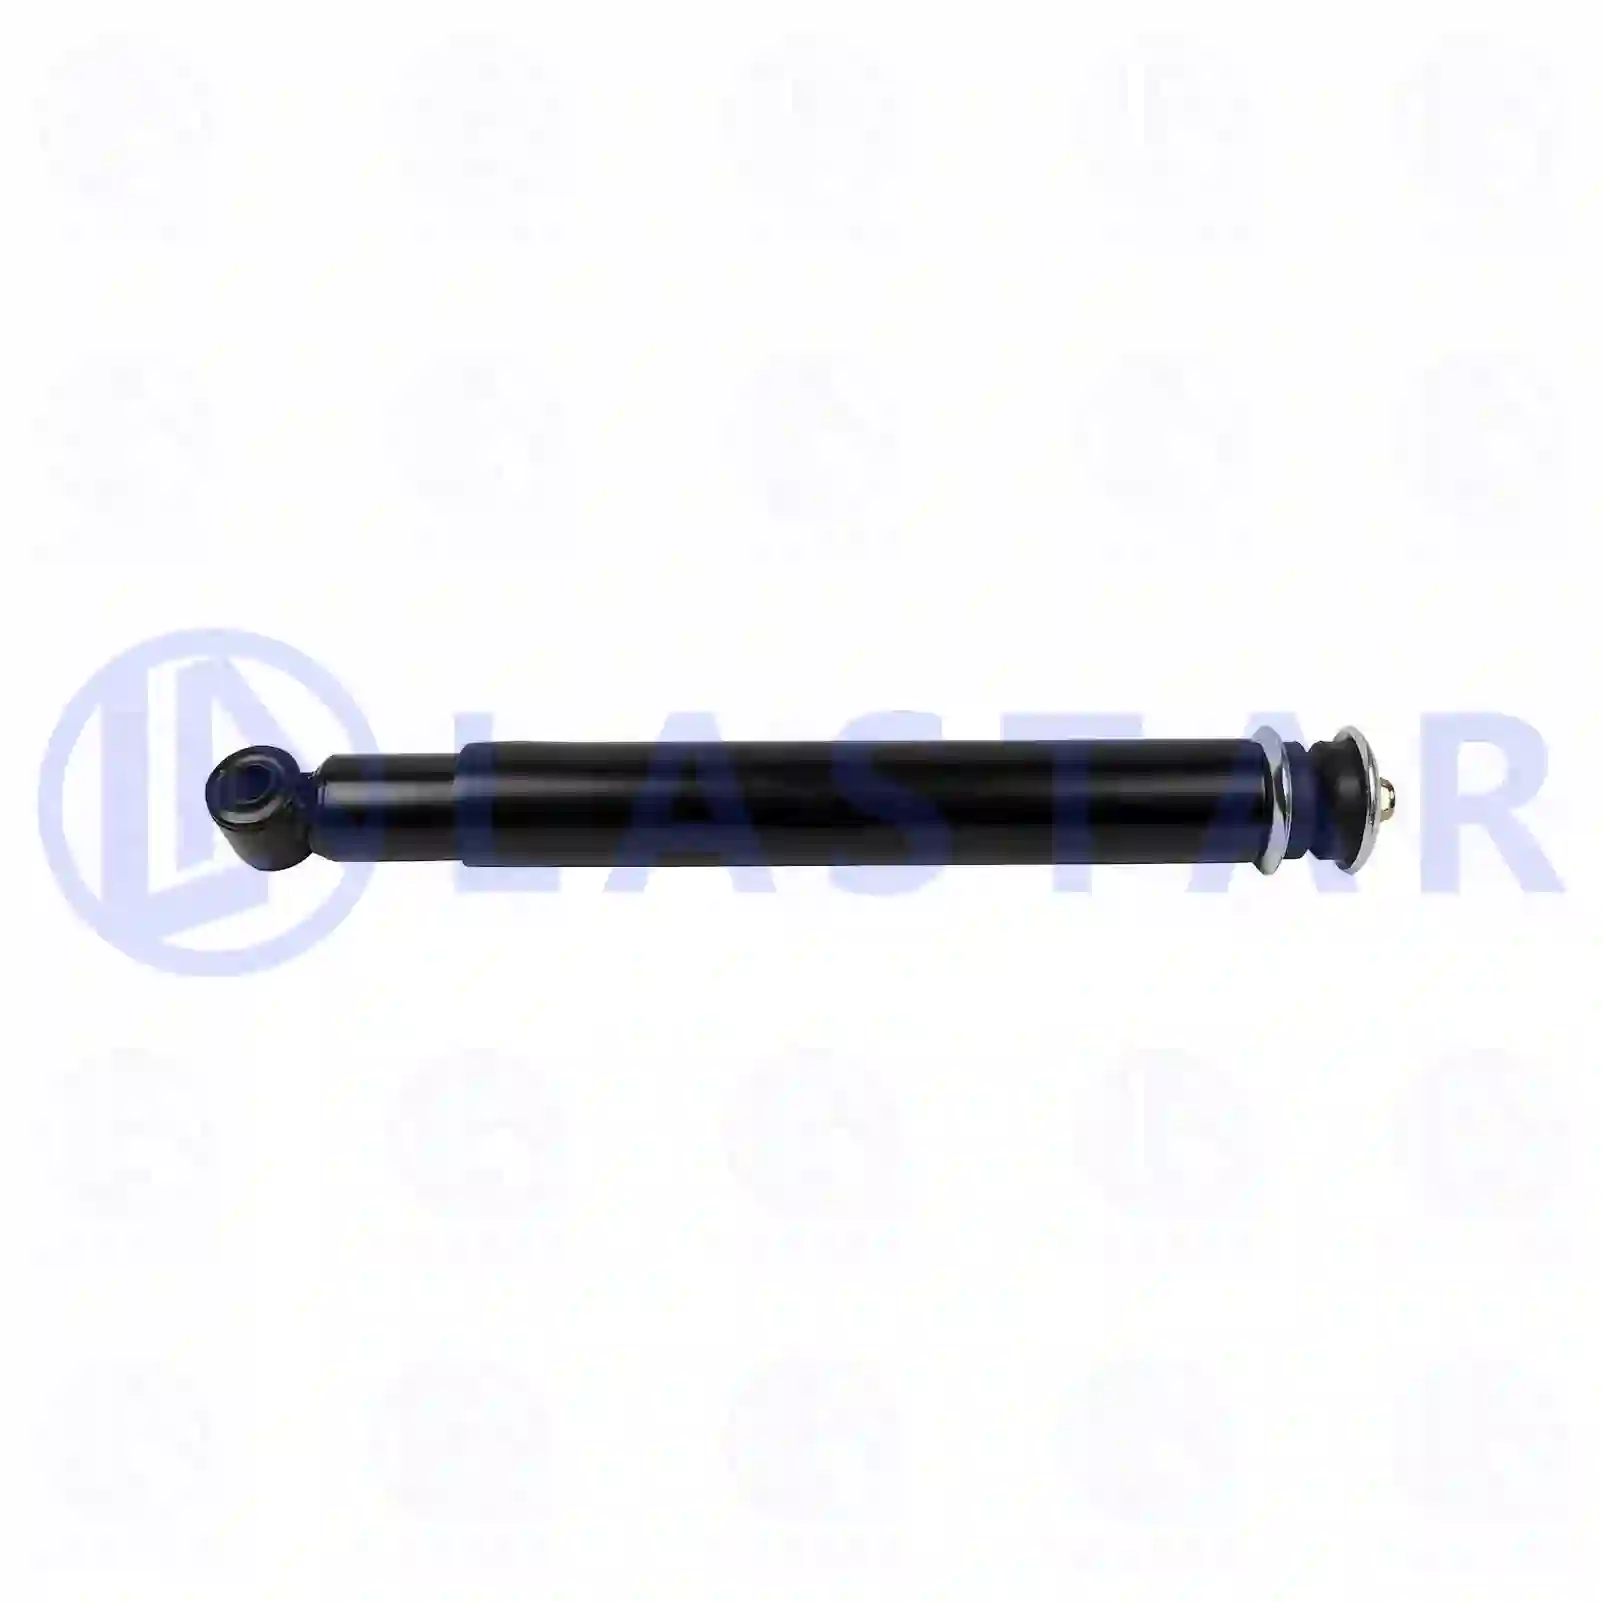 Shock absorber, 77730124, 1371448, 1478500, 1371447, 137447, 1478499, , ||  77730124 Lastar Spare Part | Truck Spare Parts, Auotomotive Spare Parts Shock absorber, 77730124, 1371448, 1478500, 1371447, 137447, 1478499, , ||  77730124 Lastar Spare Part | Truck Spare Parts, Auotomotive Spare Parts